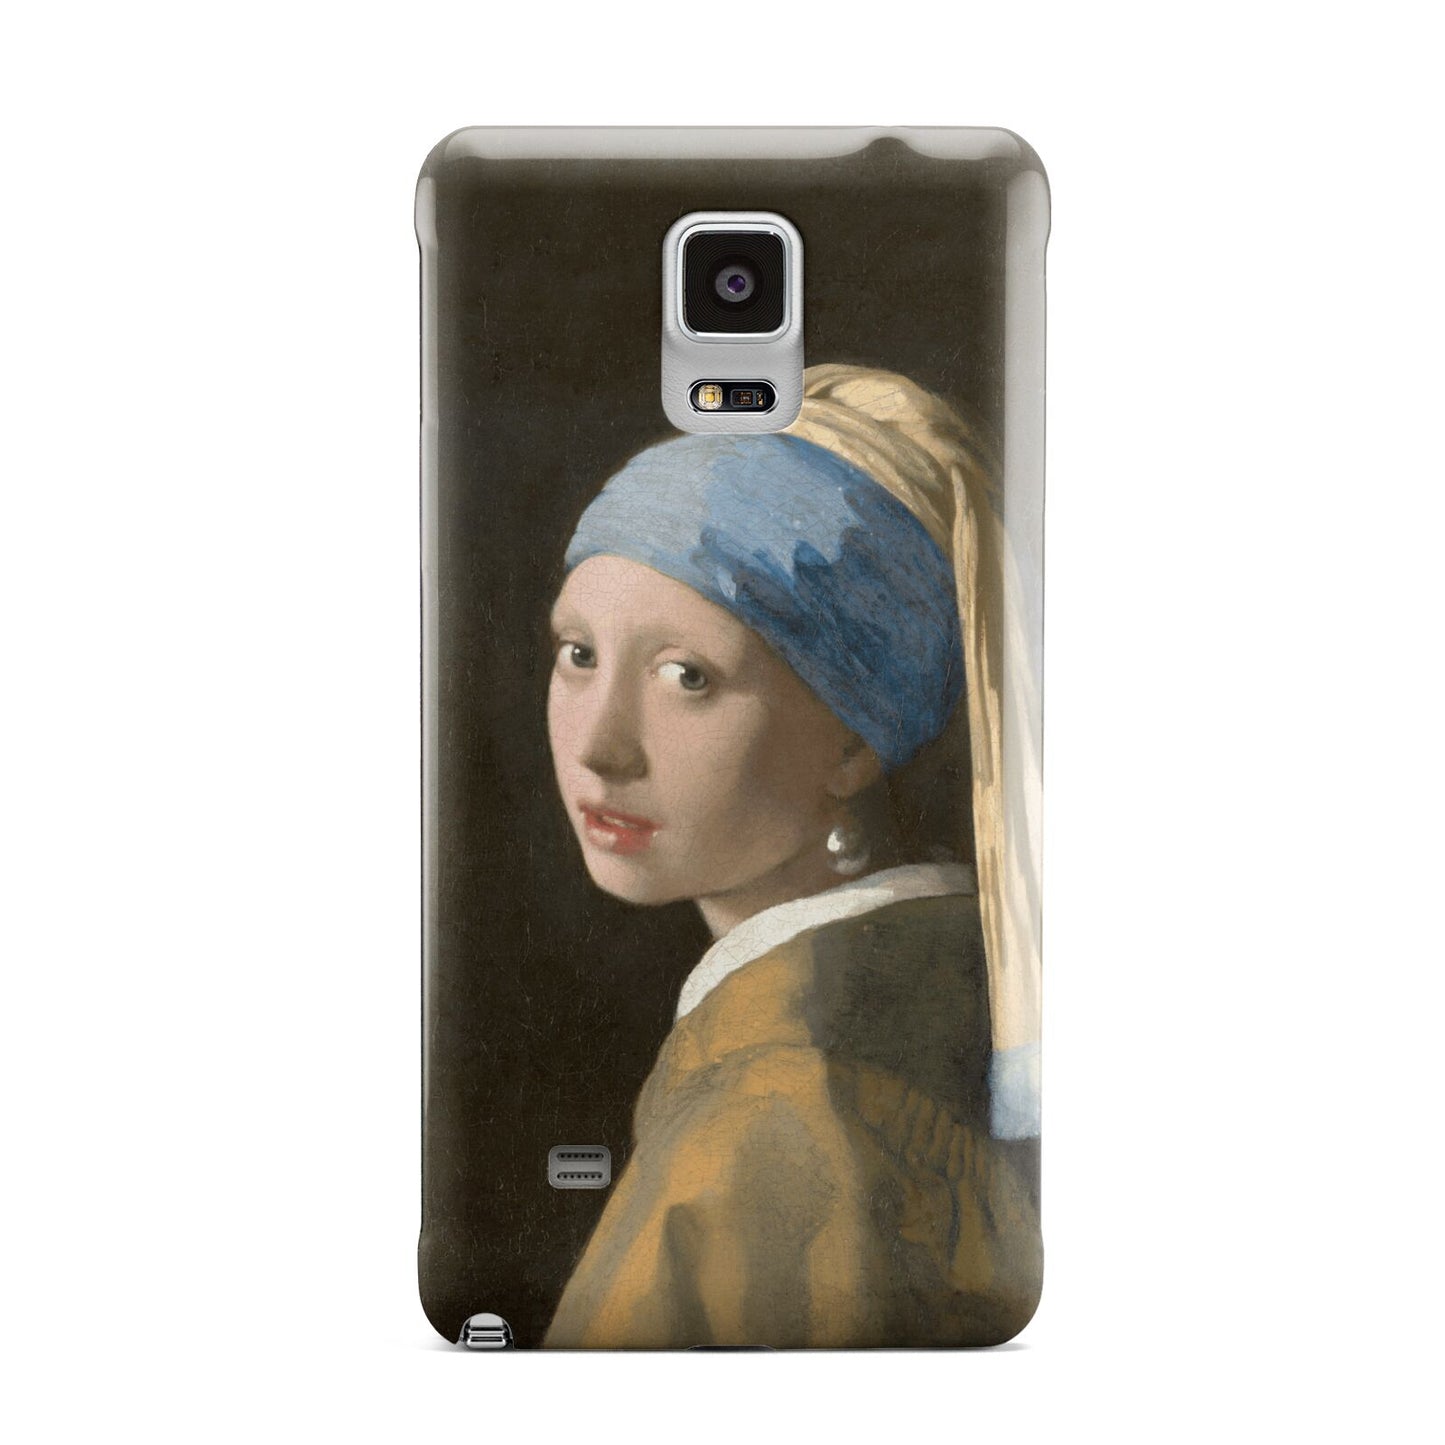 Girl With A Pearl Earring By Johannes Vermeer Samsung Galaxy Note 4 Case